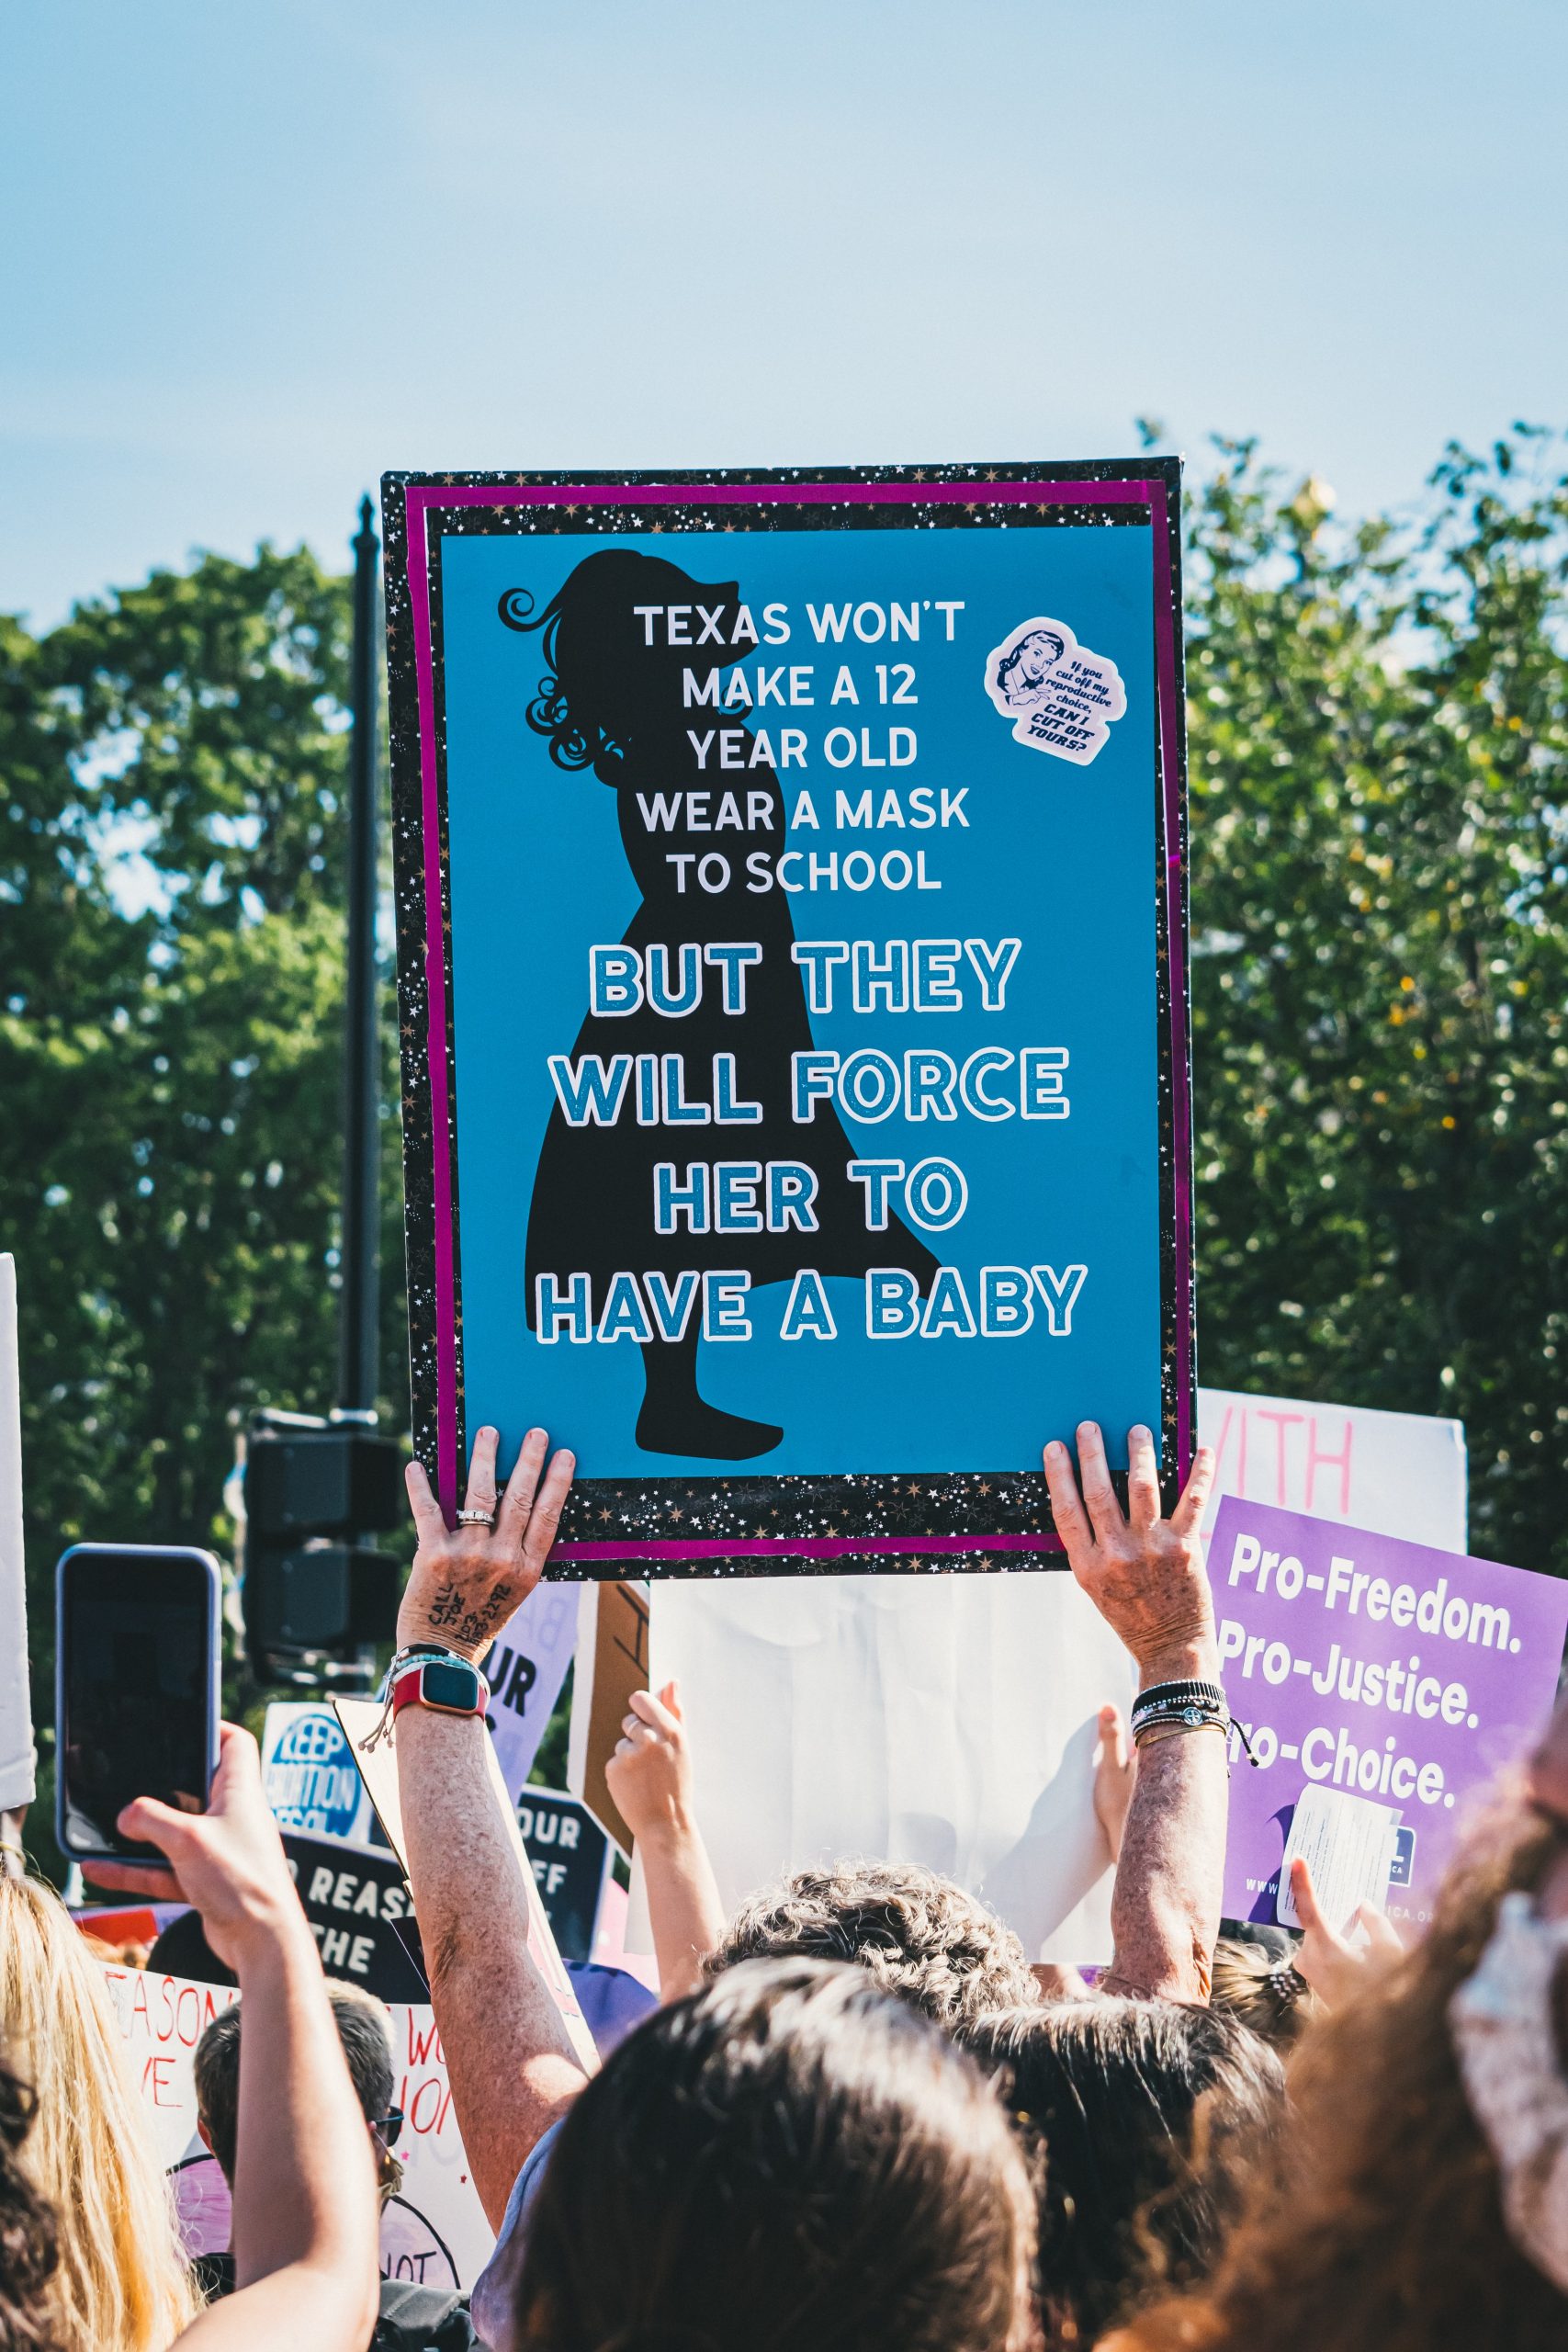 A sign his held above a crowd of protesters. I shows a young girl silhouetted in black on a blue background. The text reads: "Texas won't make a 12 year old child wear a mask to school but they will force her to have a baby"